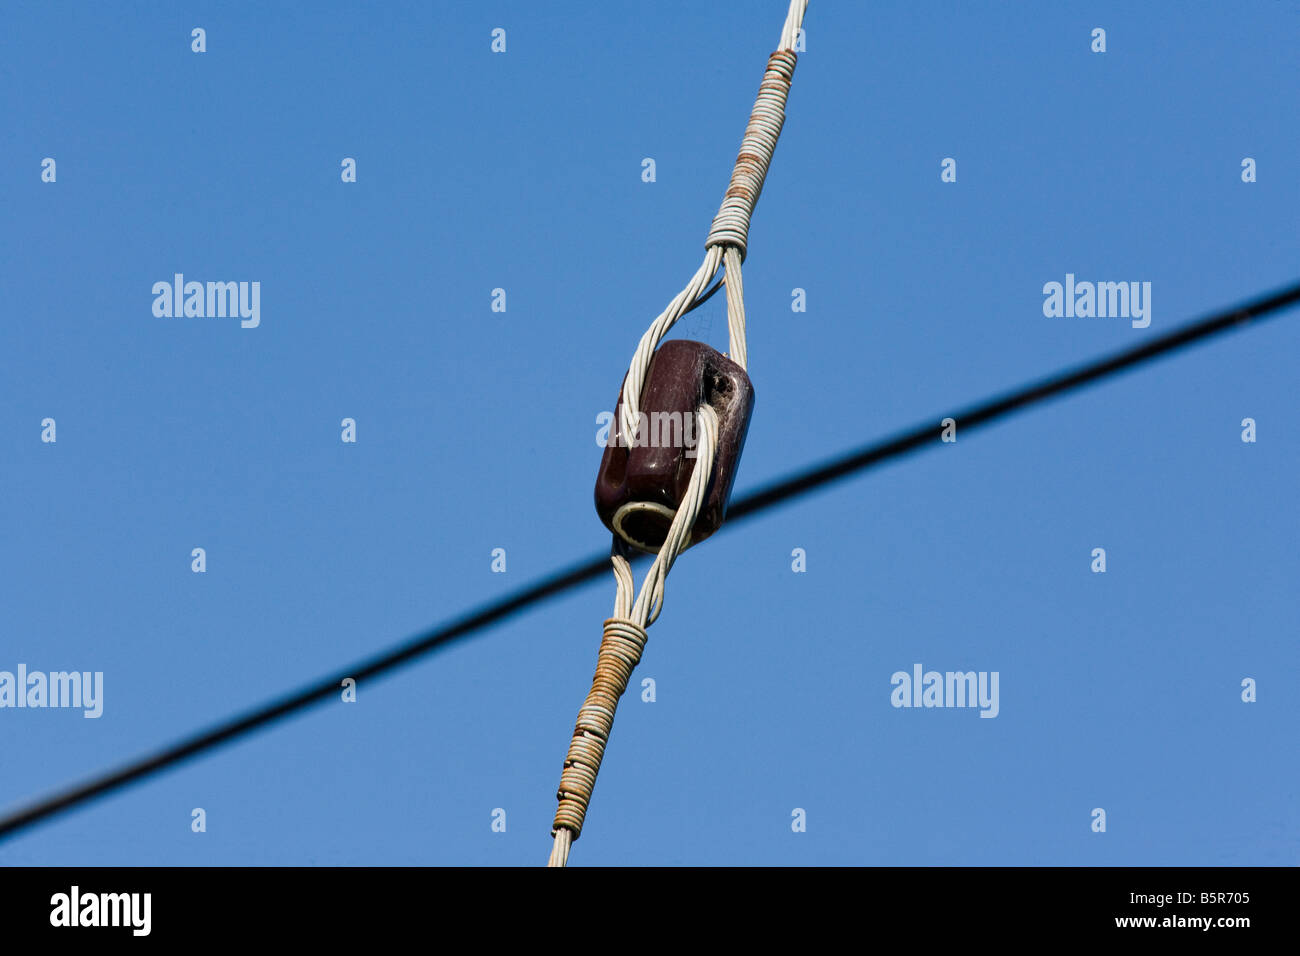 Electrical Insulator on guy wire for utility pole Stock Photo